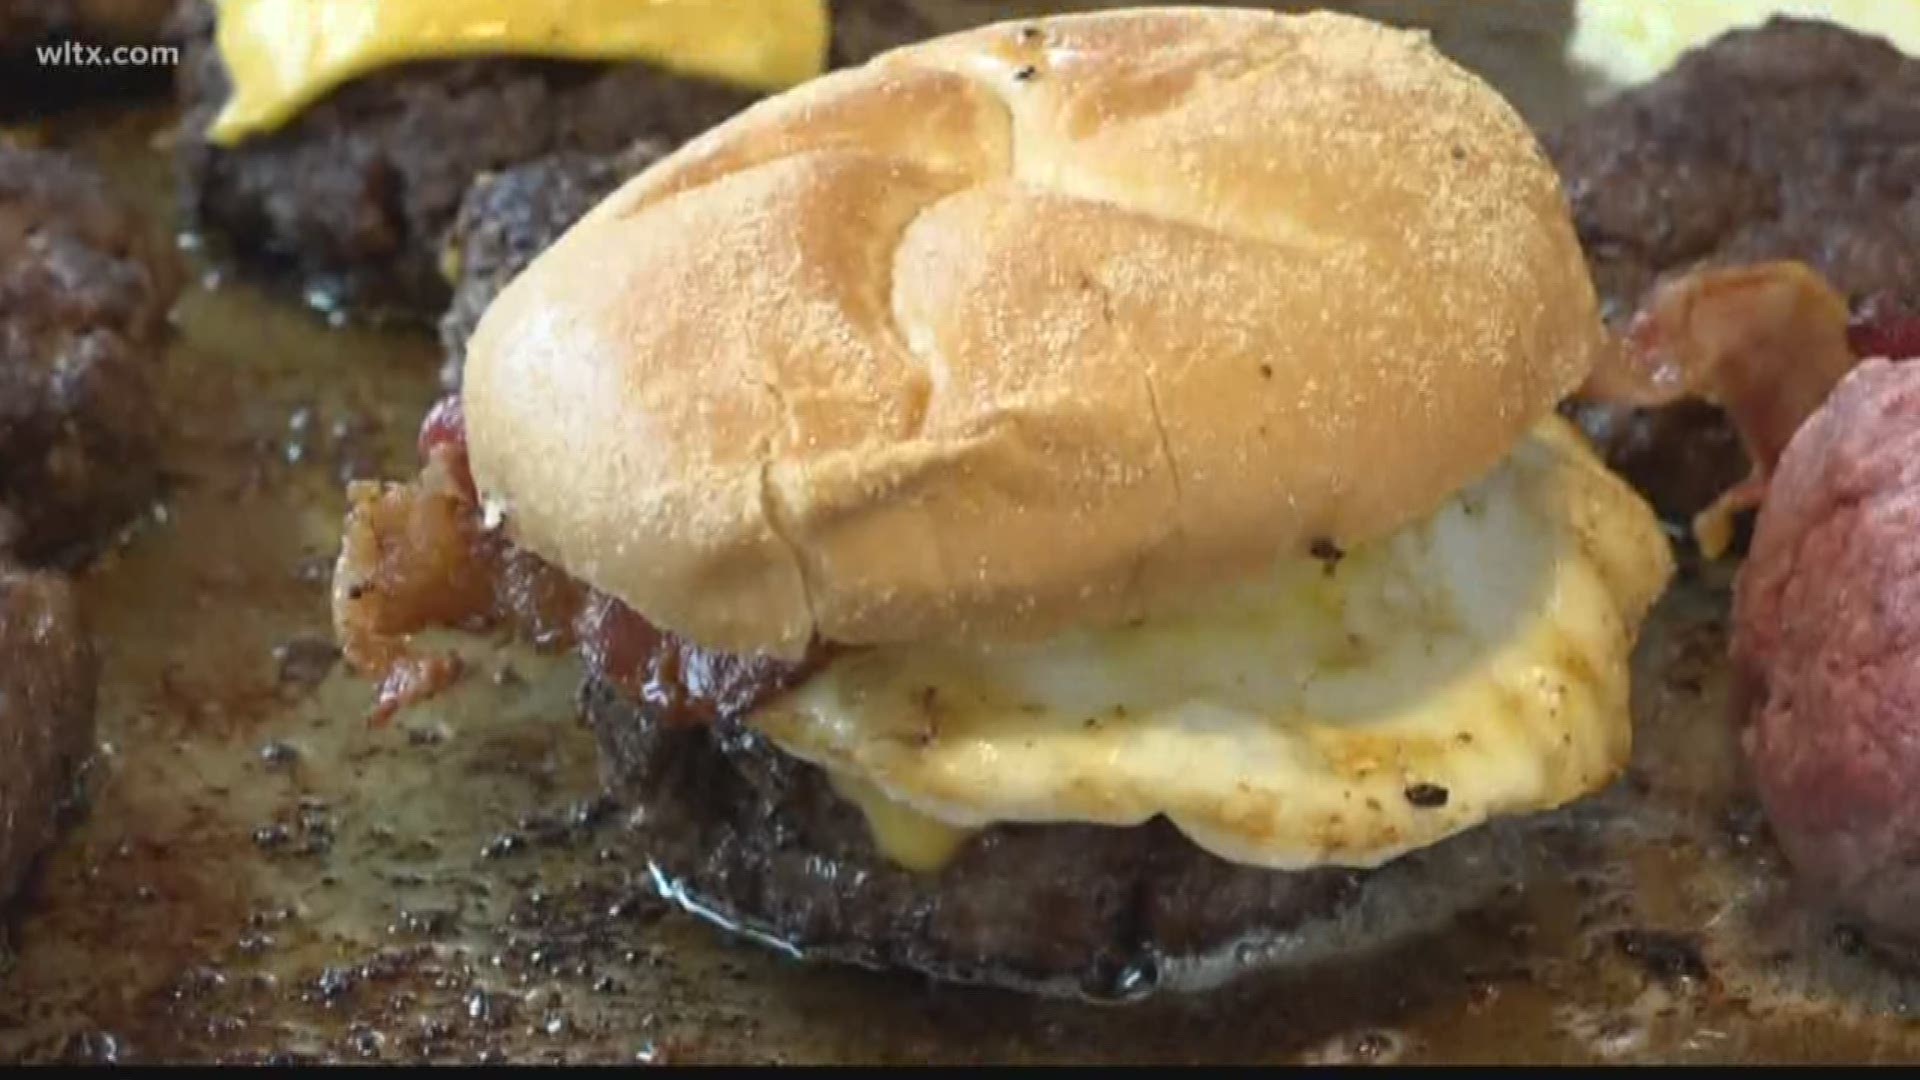 What's your favorite kind of burger? You can find it at Burger Bob's at the South Carolina State Fair.